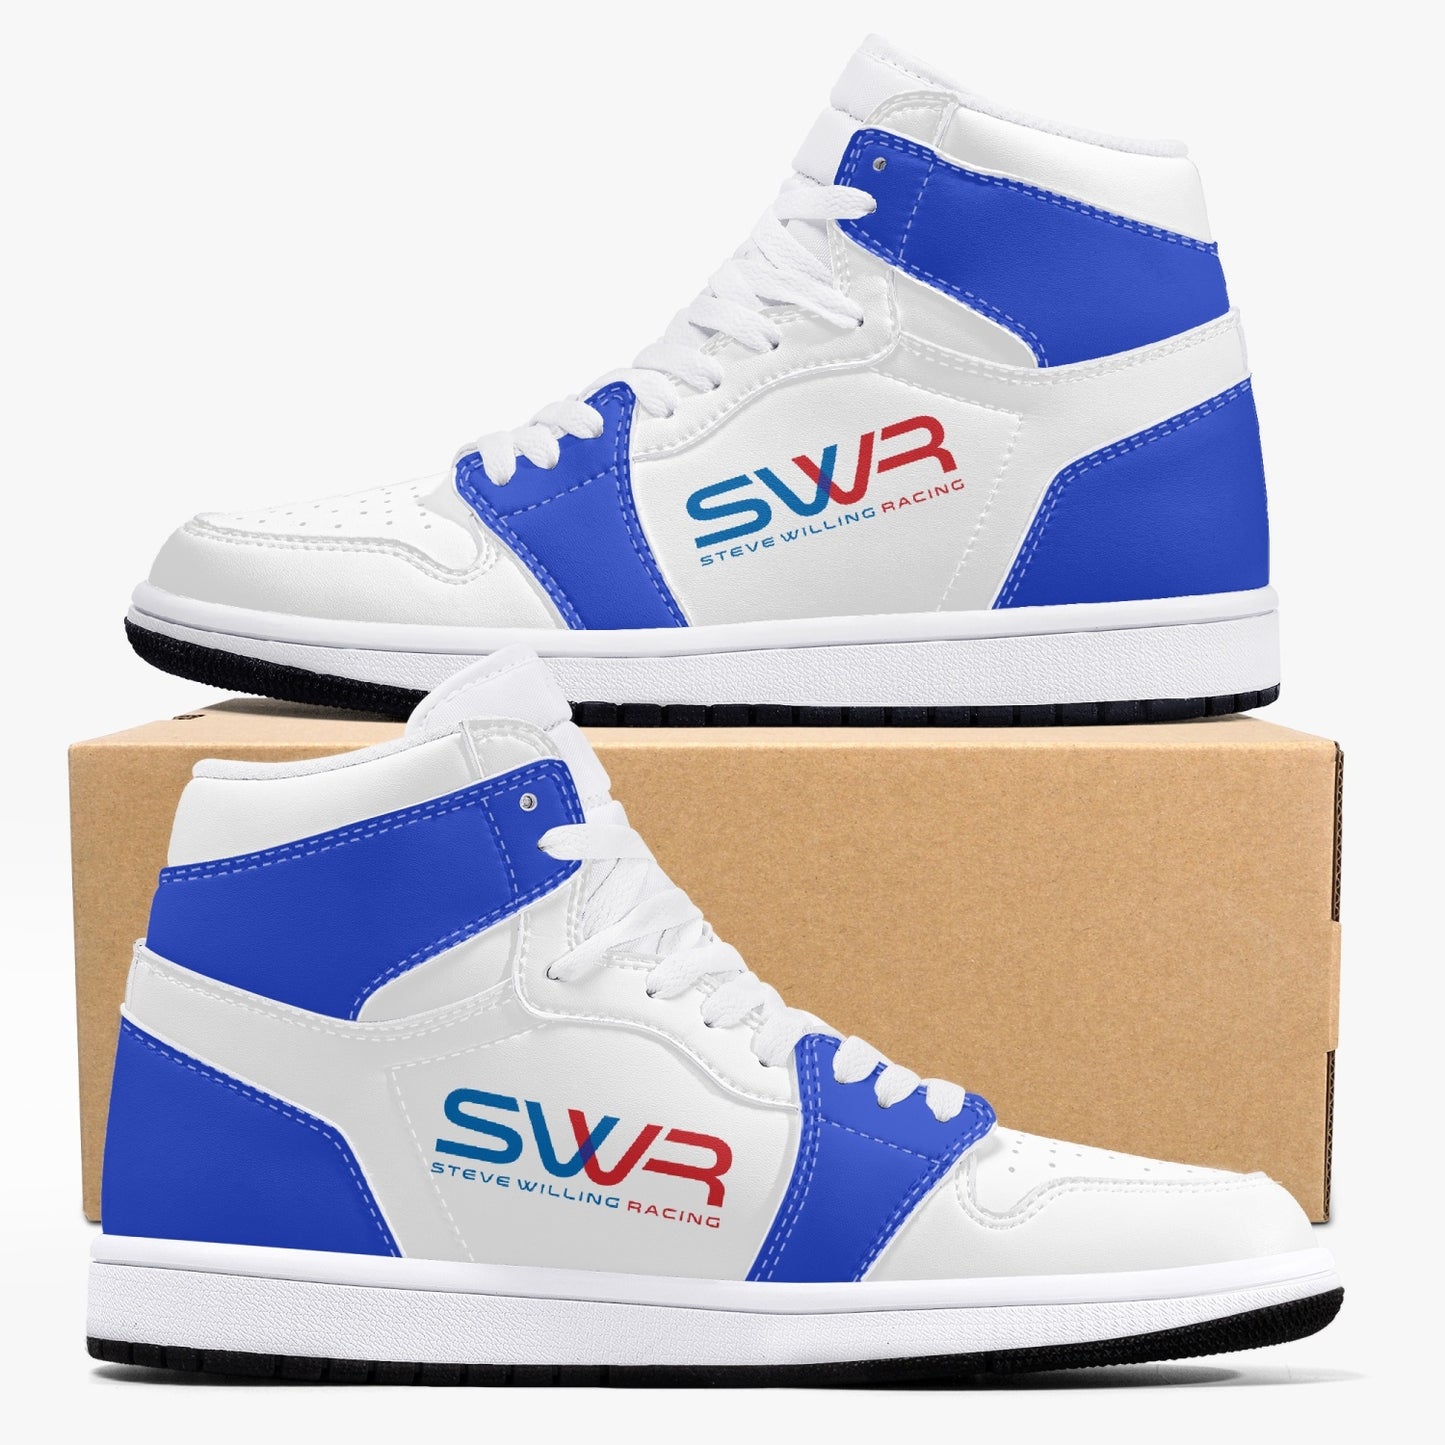 STEVE WILLING F2 MARCH version 3 High-Top Leather Sneakers - white/blue